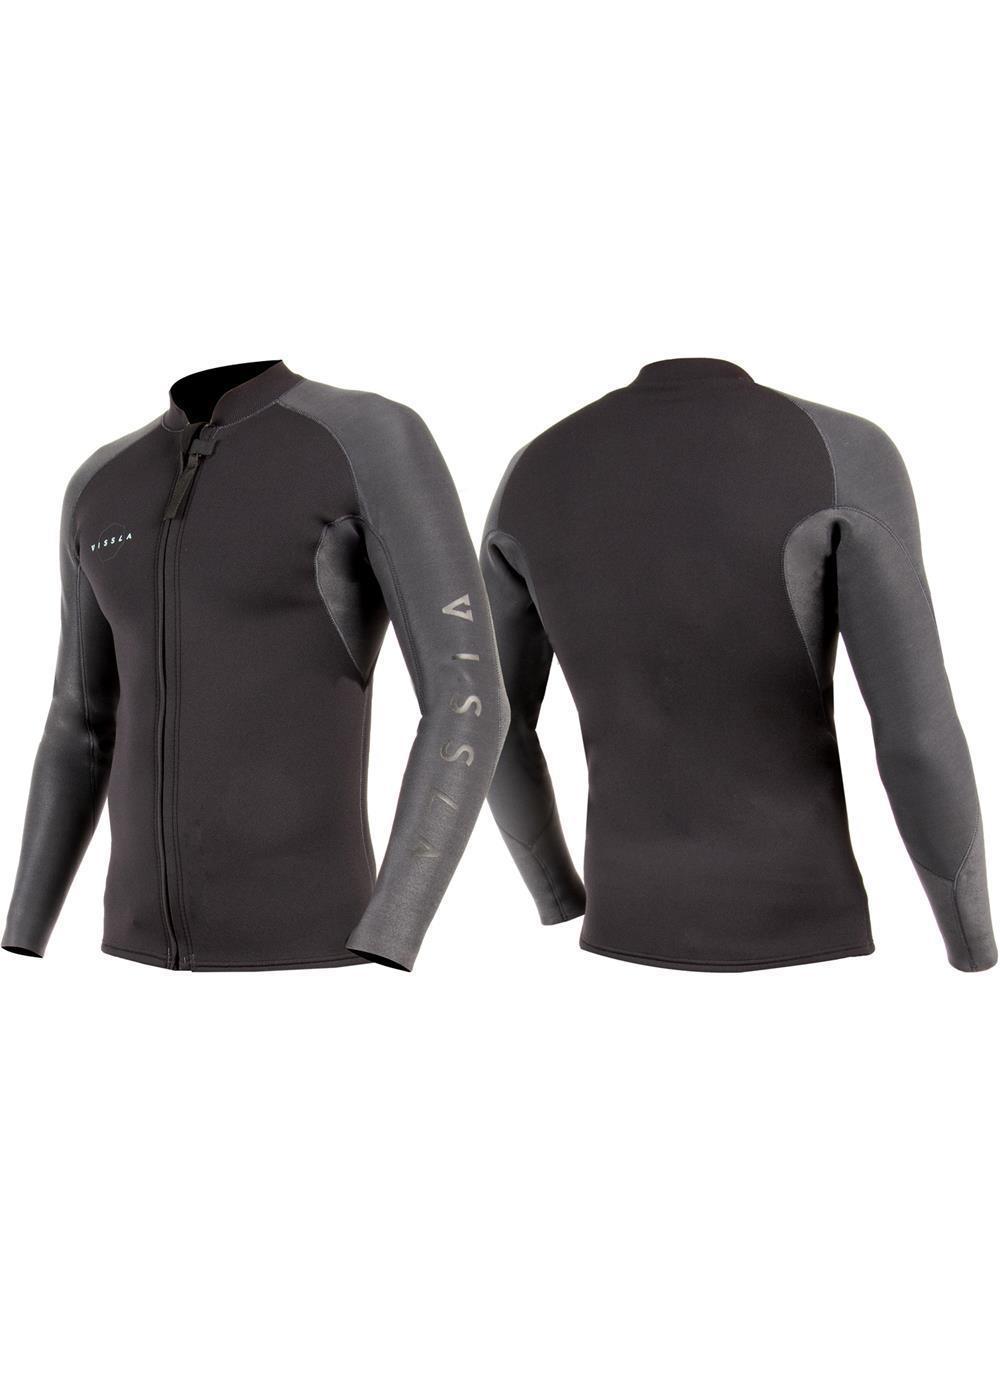 Vissla Men's Black and Grey High Seas 2mm Front Zip Long Sleeve Jacket. Front and Back View.